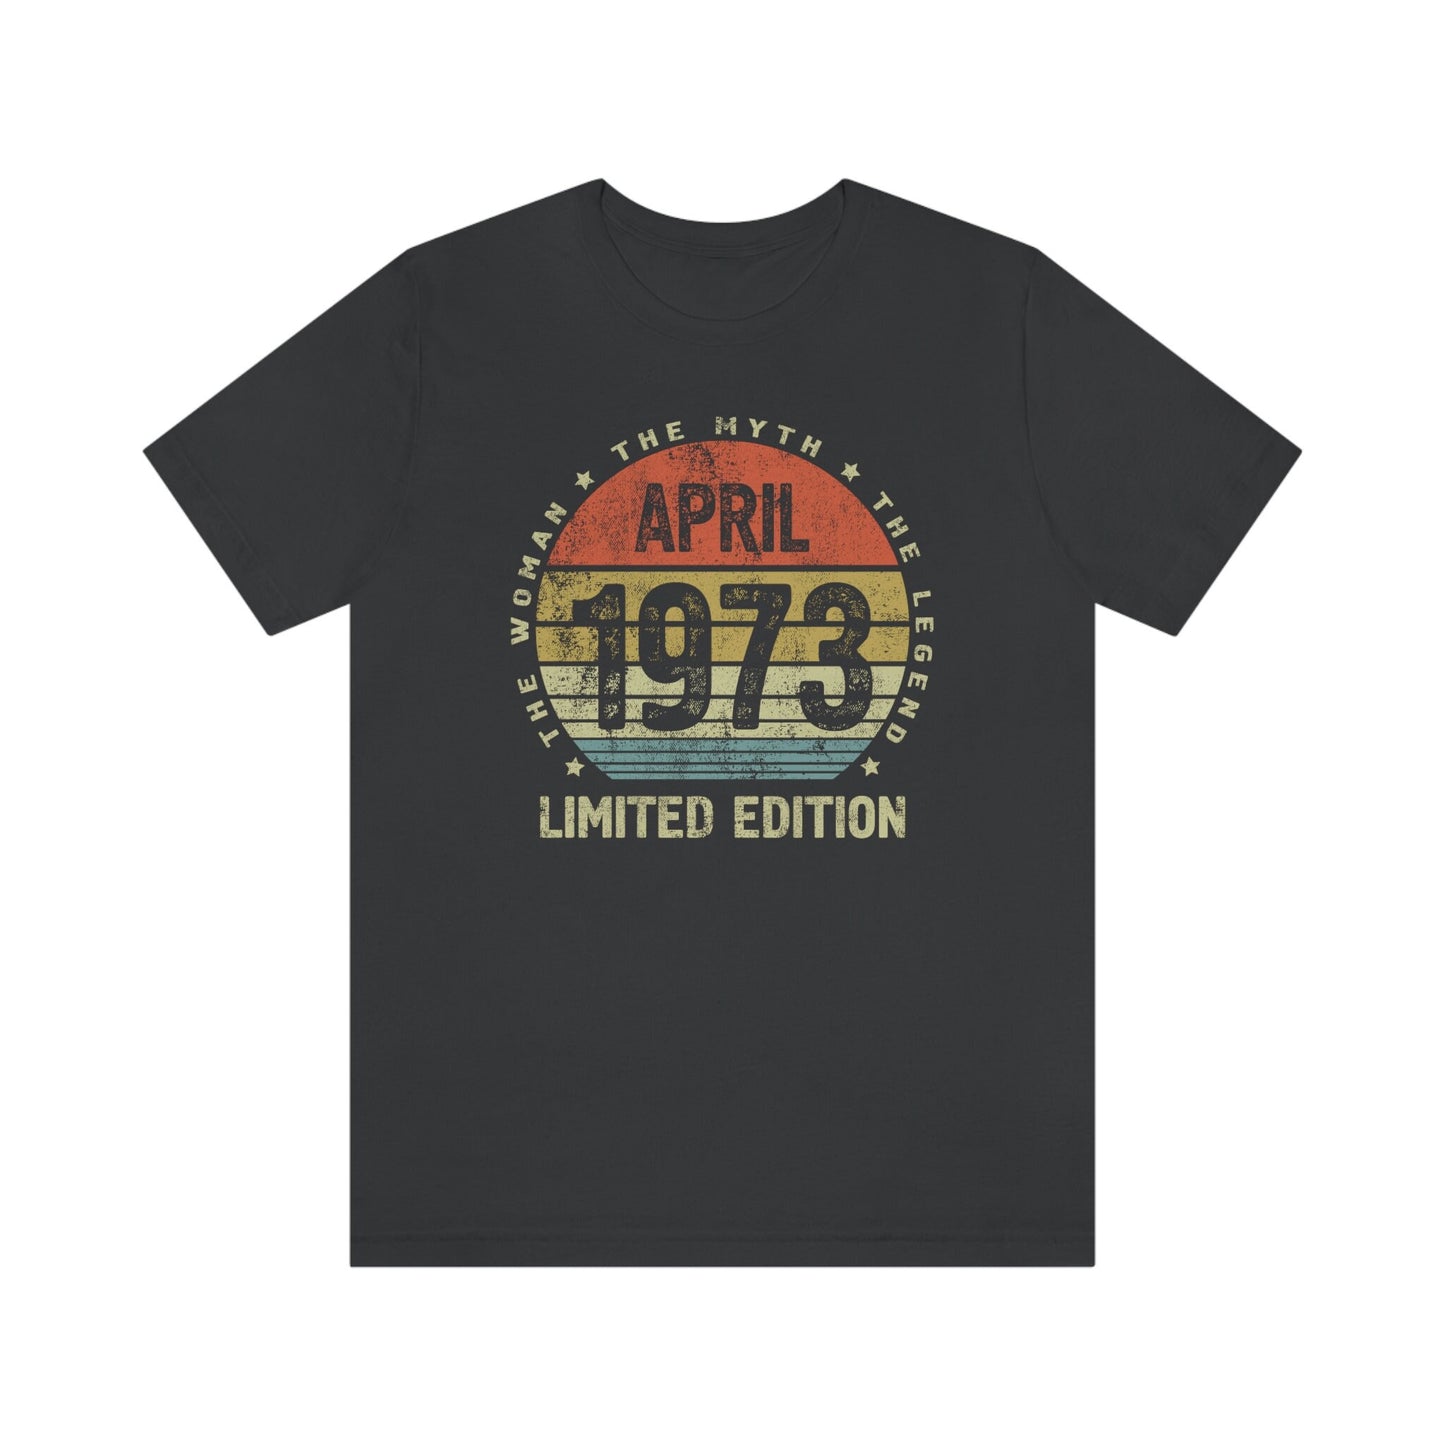 April 1973 birthday shirt for women or wife,  Gift shirt for sister or girlfriend